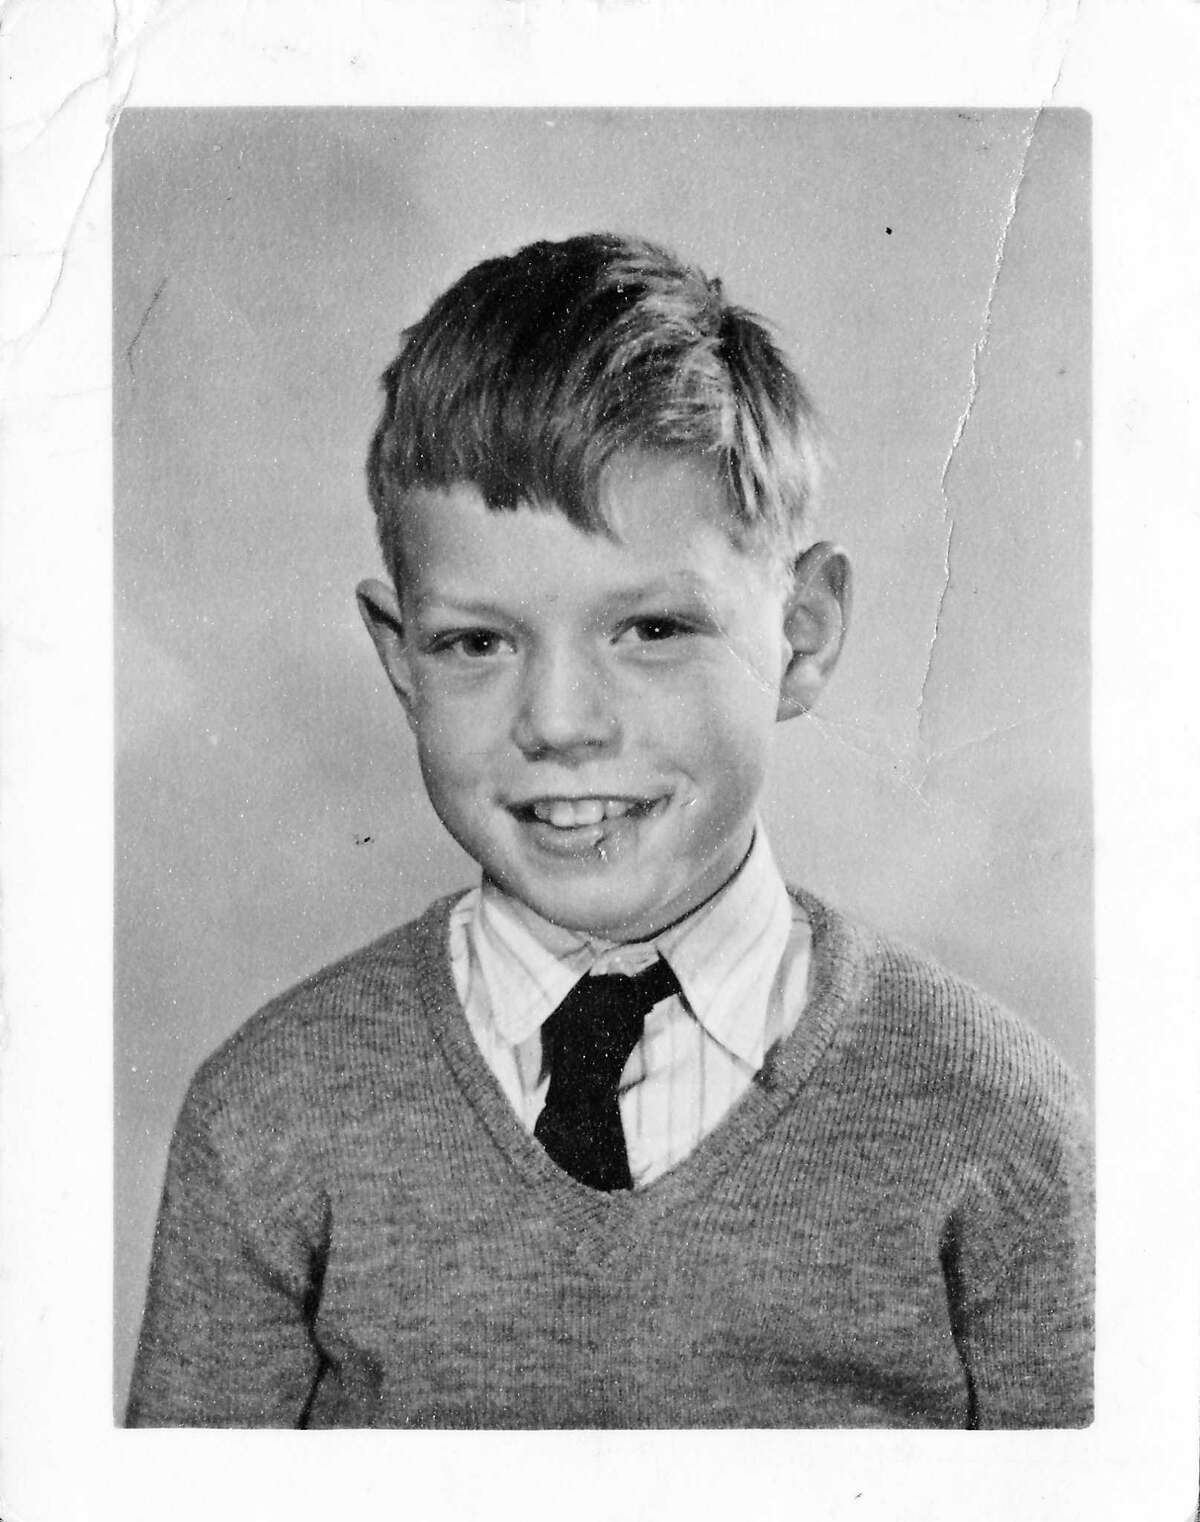 A school photo of a 9-year-old Mick Jagger in 1951 at Wentworth Junior County Primary School in his home town Dartford. This previously unseen image will form part of The Rolling Stones - 'Exhibitionism' at London's Saatchi Gallery. Mick Jagger, Keith Richards, Charlie Watts and Ronnie Wood have opened their personal archives and found never before seen photographs of themselves as youngsters. These along with hundreds more rare and unseen images will create the first ever international Rolling Stones exhibition which will open at the Saatchi Gallery in April 2016.